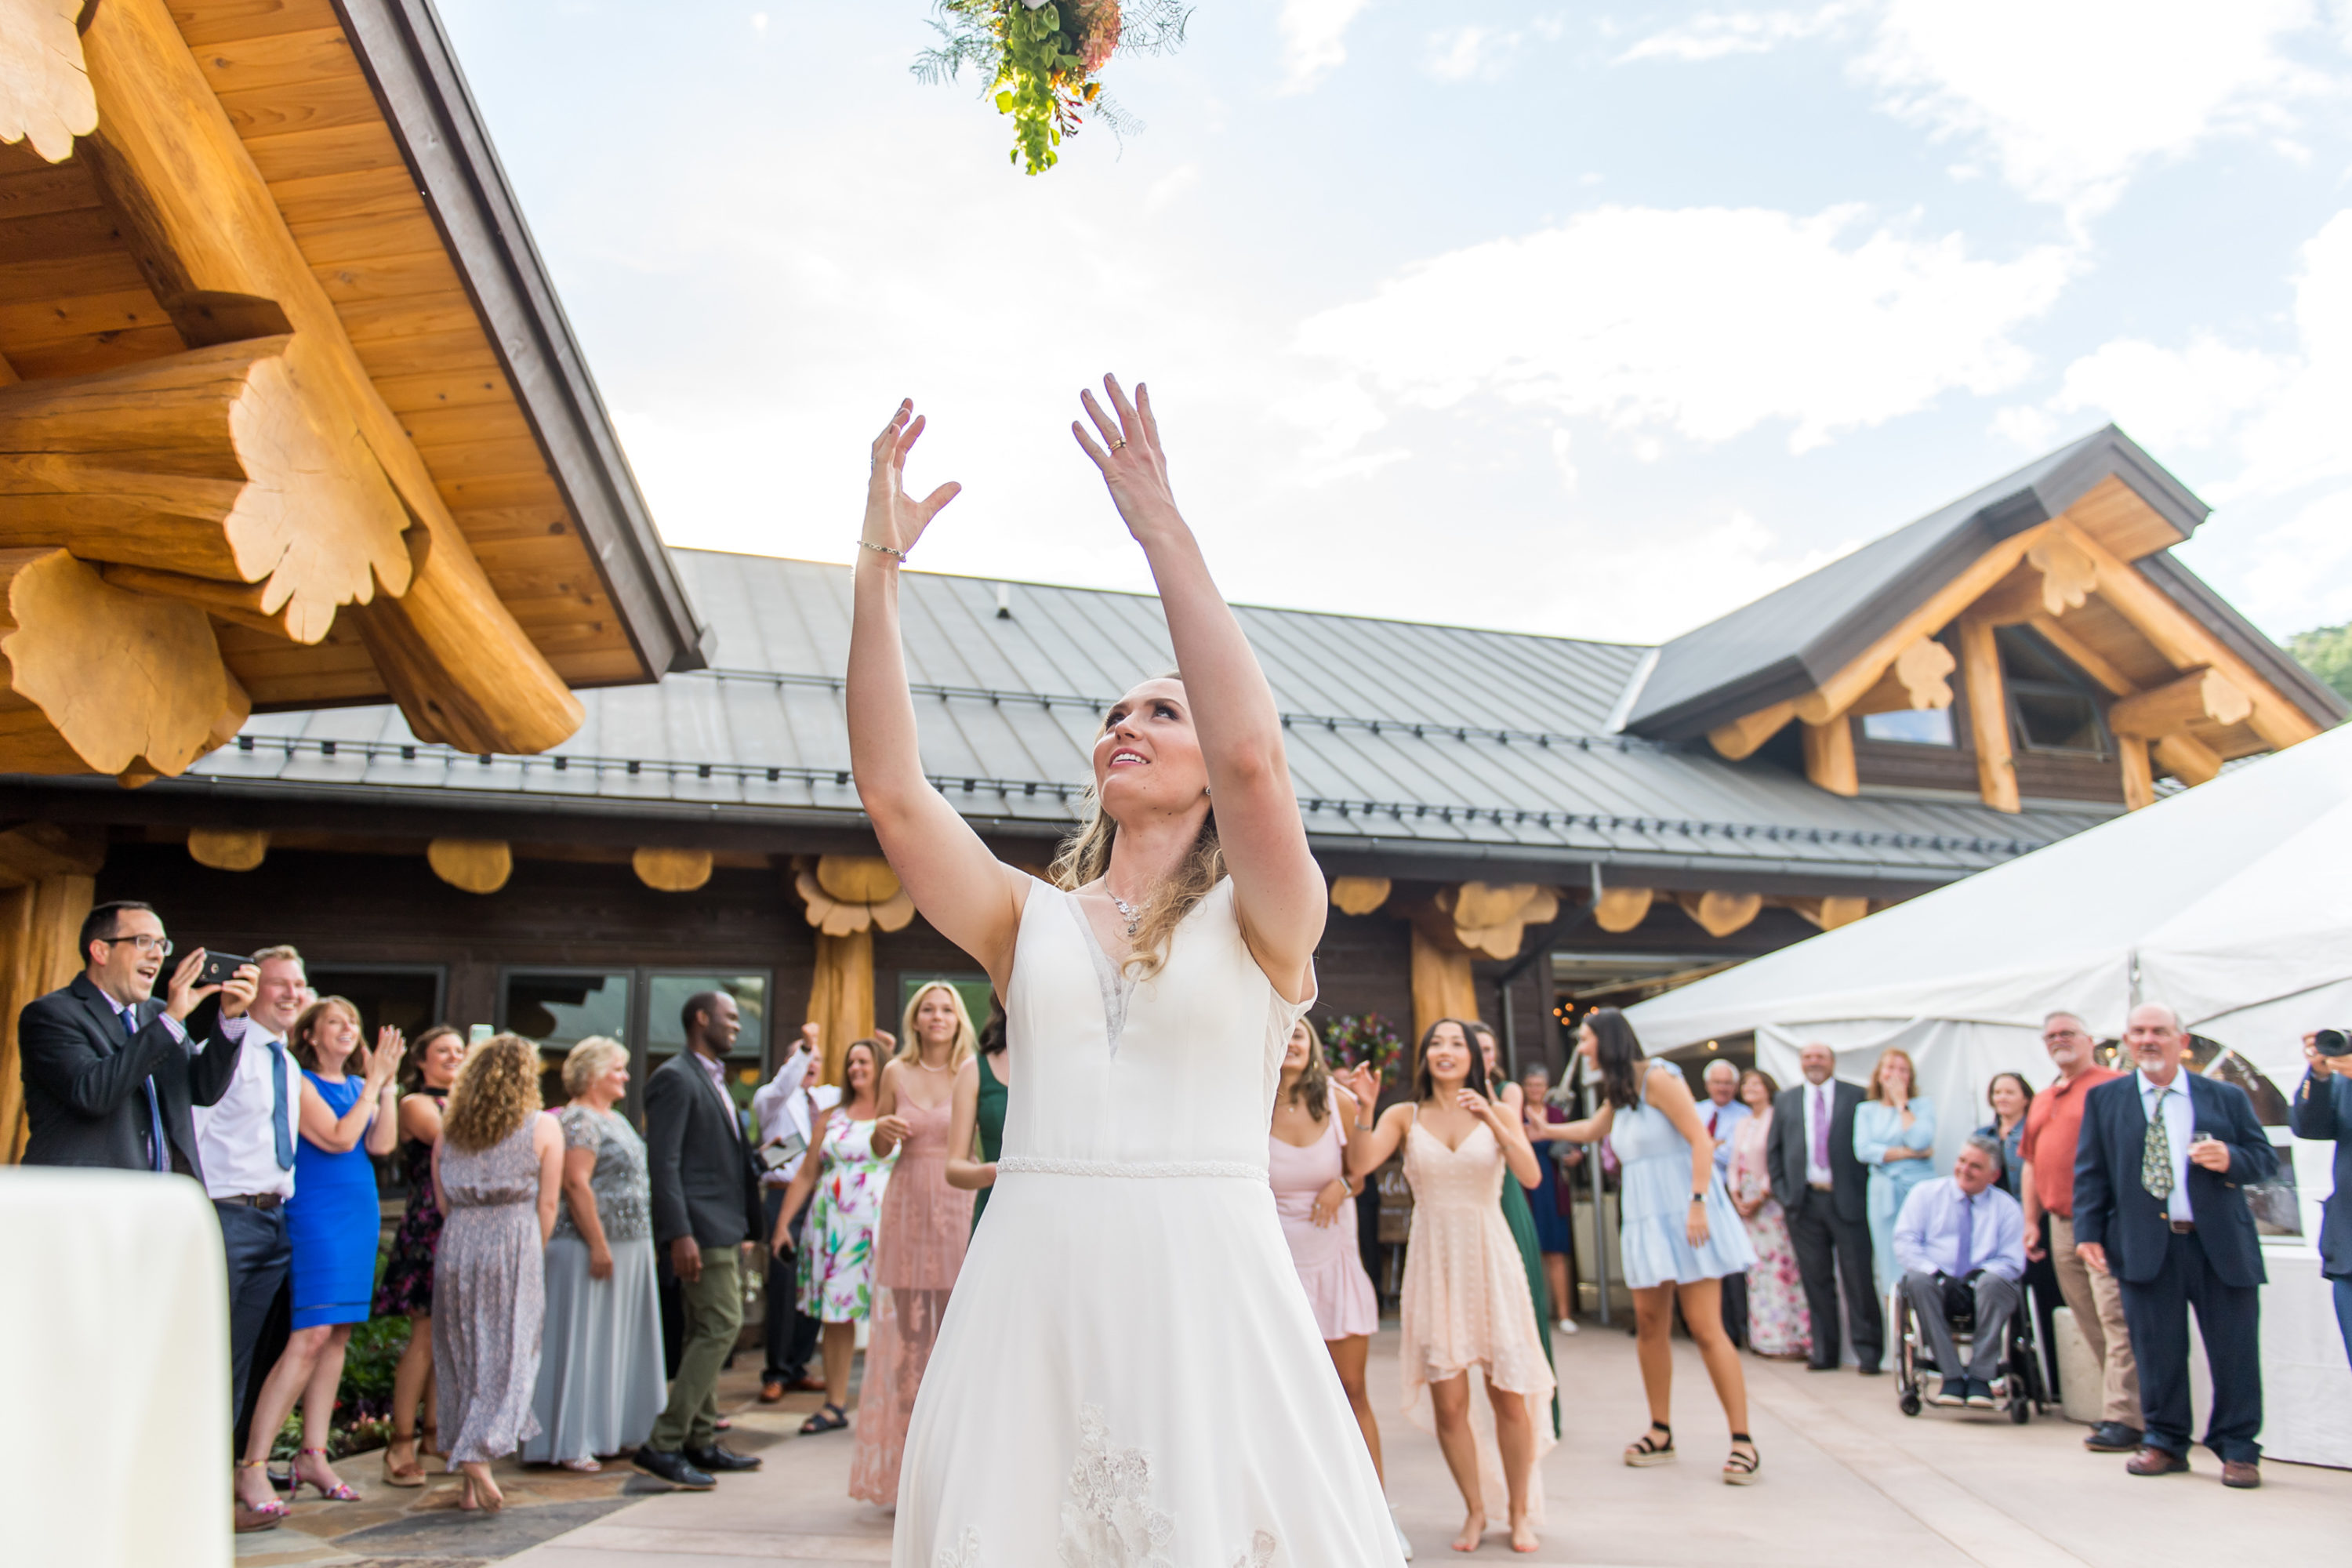 The bride tosses the bouquet during their Telluride, Colorado, wedding.